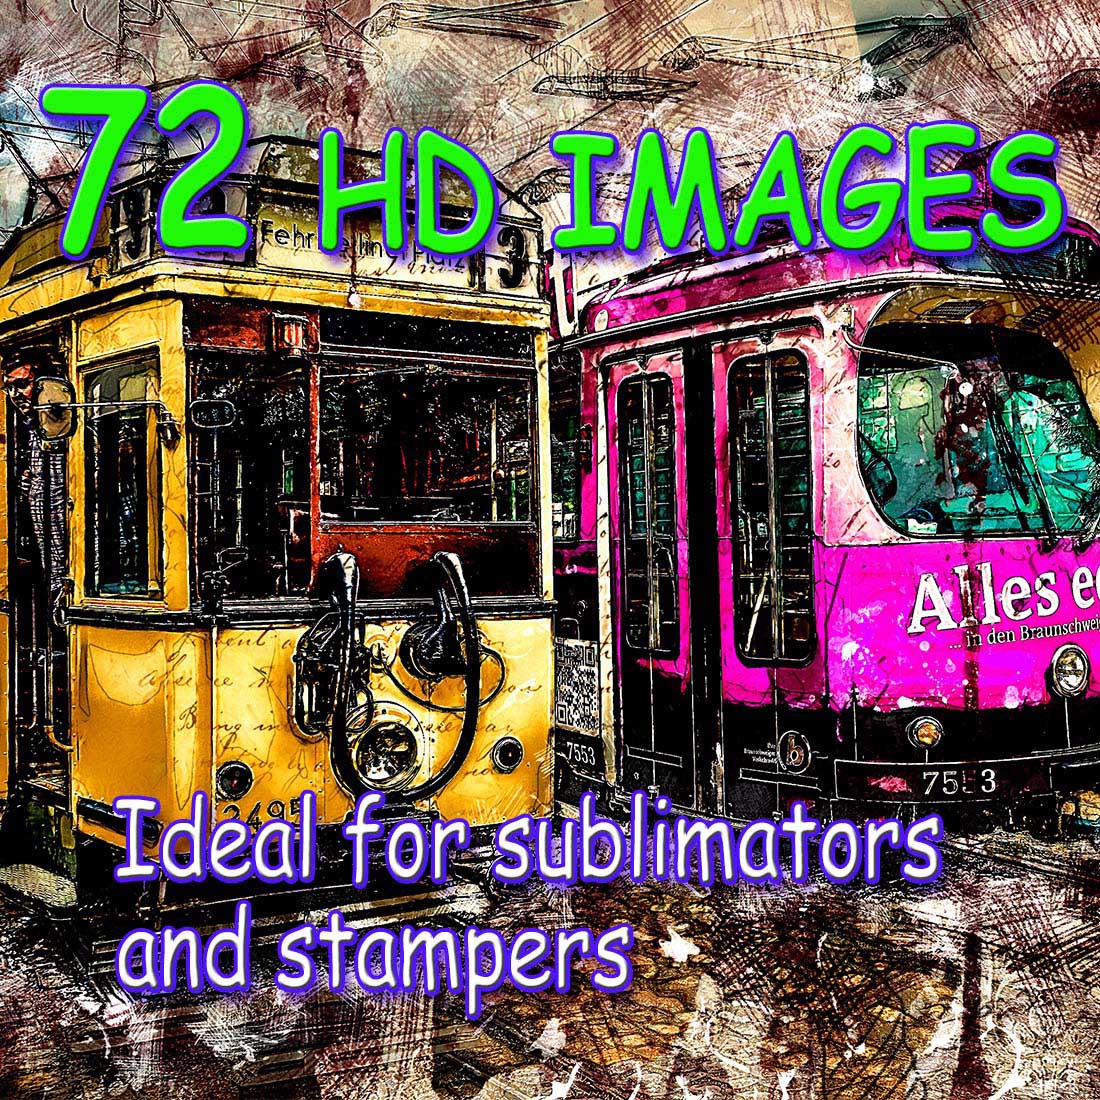 Bundle of 72 OLD TROLLEY CAR HQ Graphics Ready to Print with Grunge Style cover image.